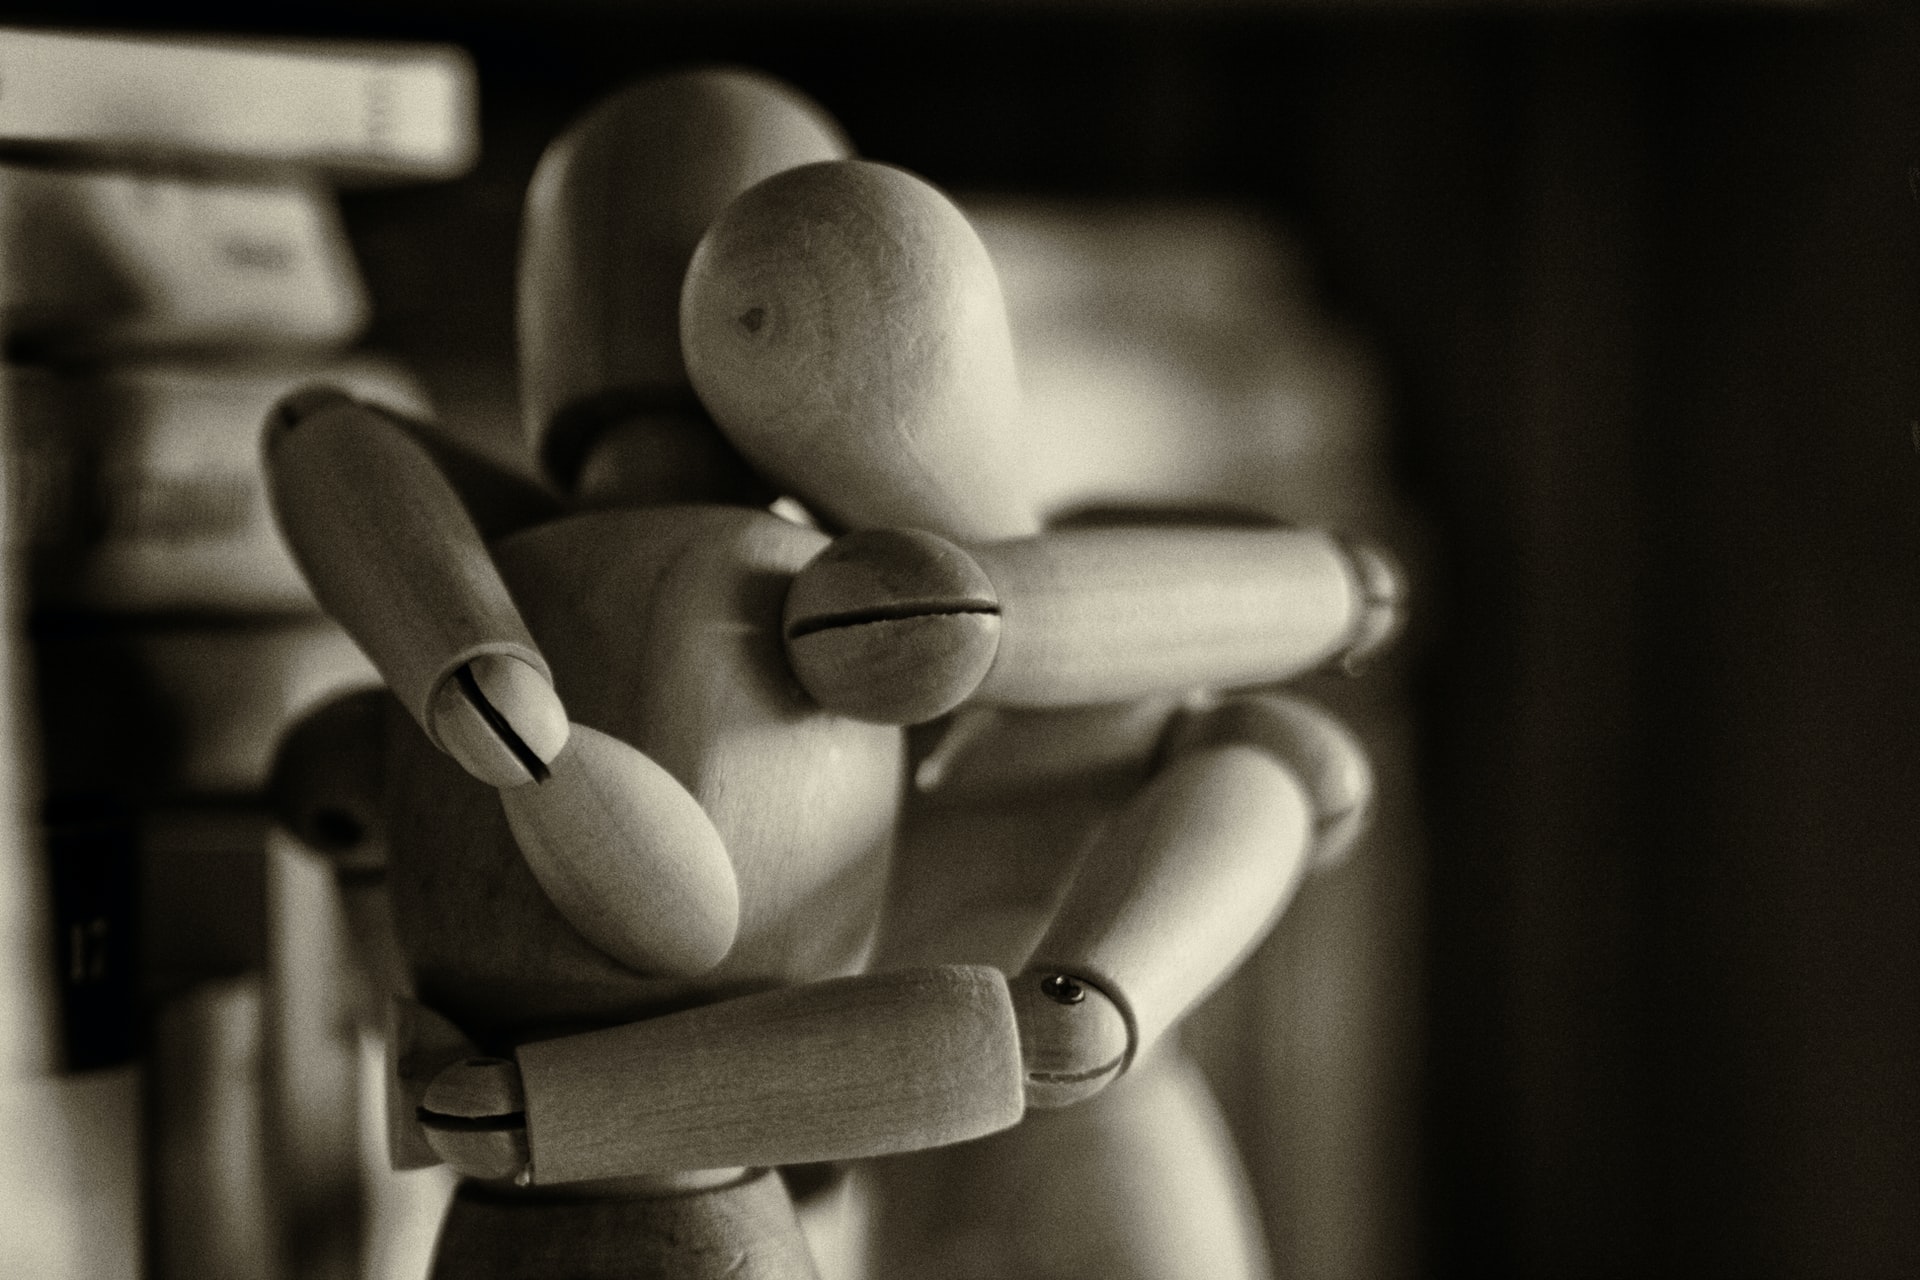 Two wooden figures in an embrace representing spousal reunions after immigration Canada steps up efforts to process more applications